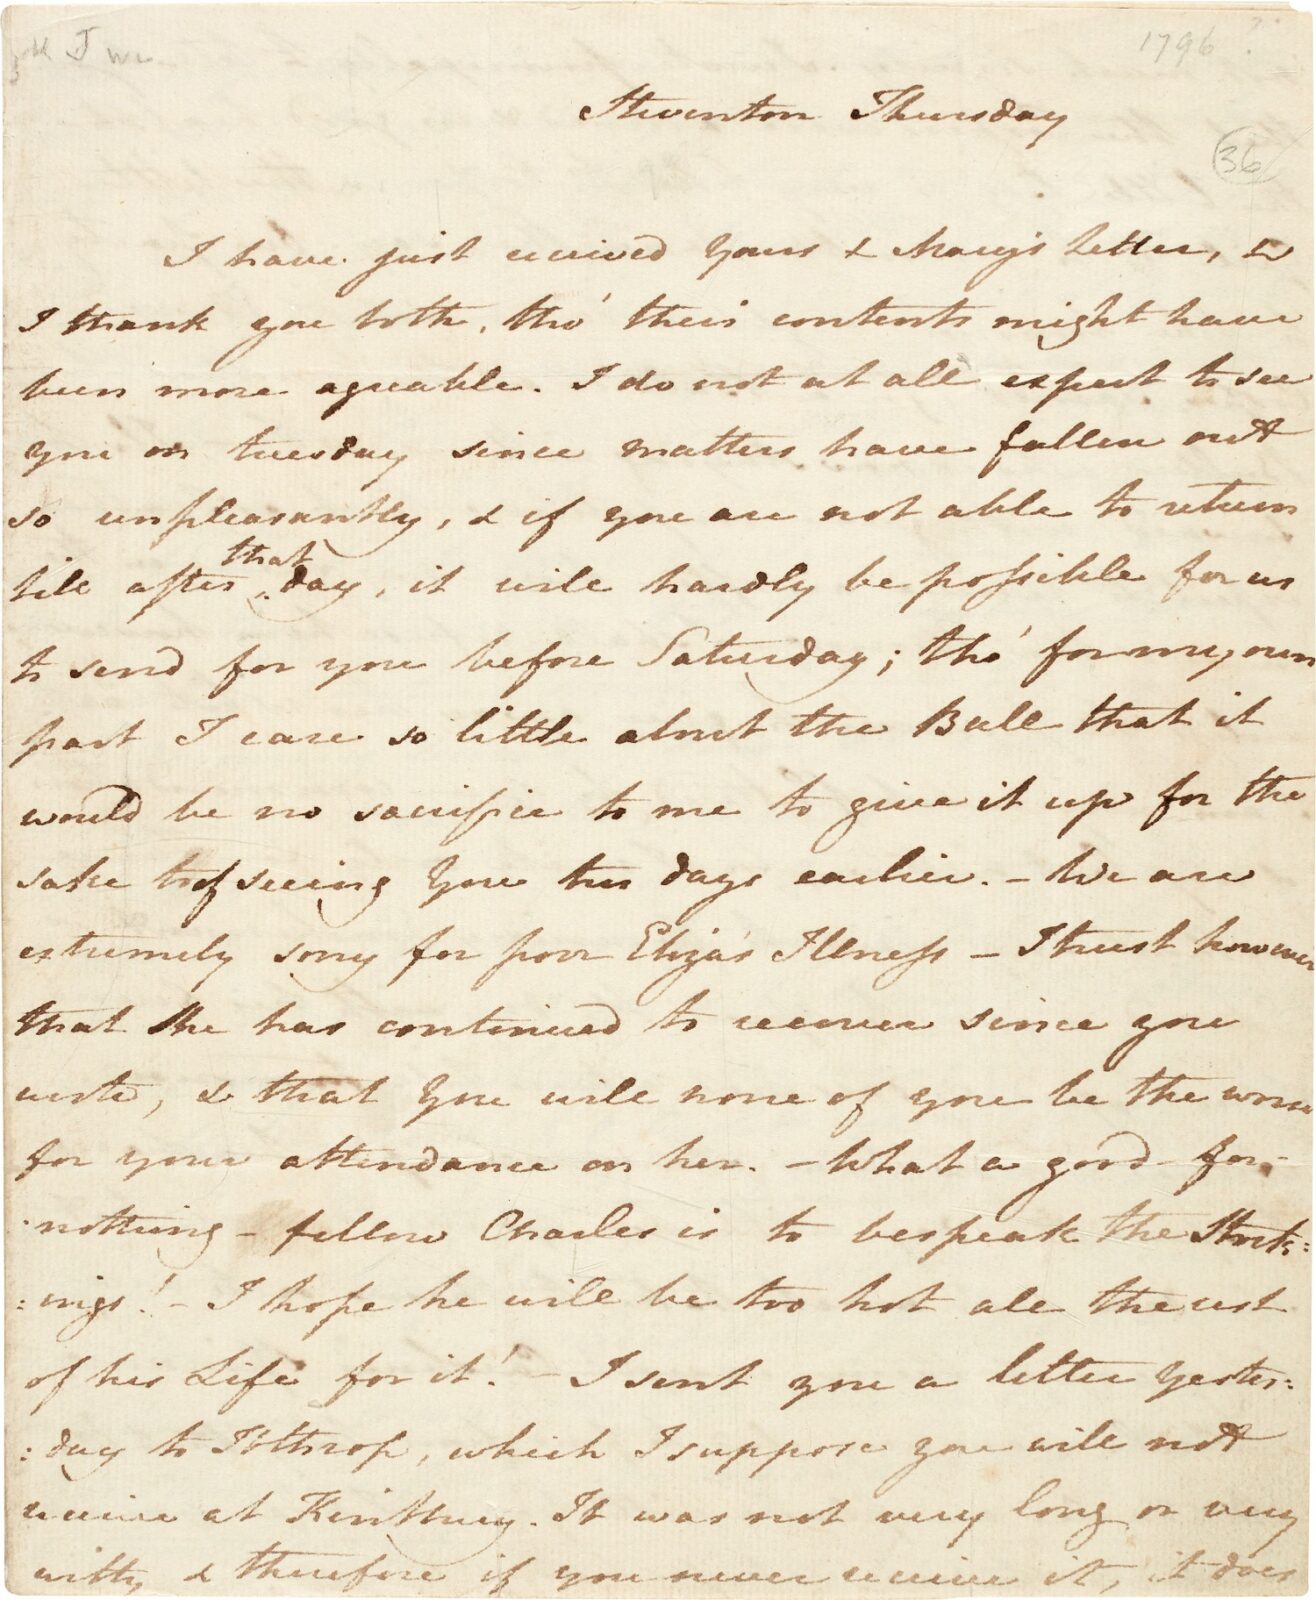 Page 1 of Jane's letter to Cassandra, written from Steventon on 14-Friday 15 January 1796